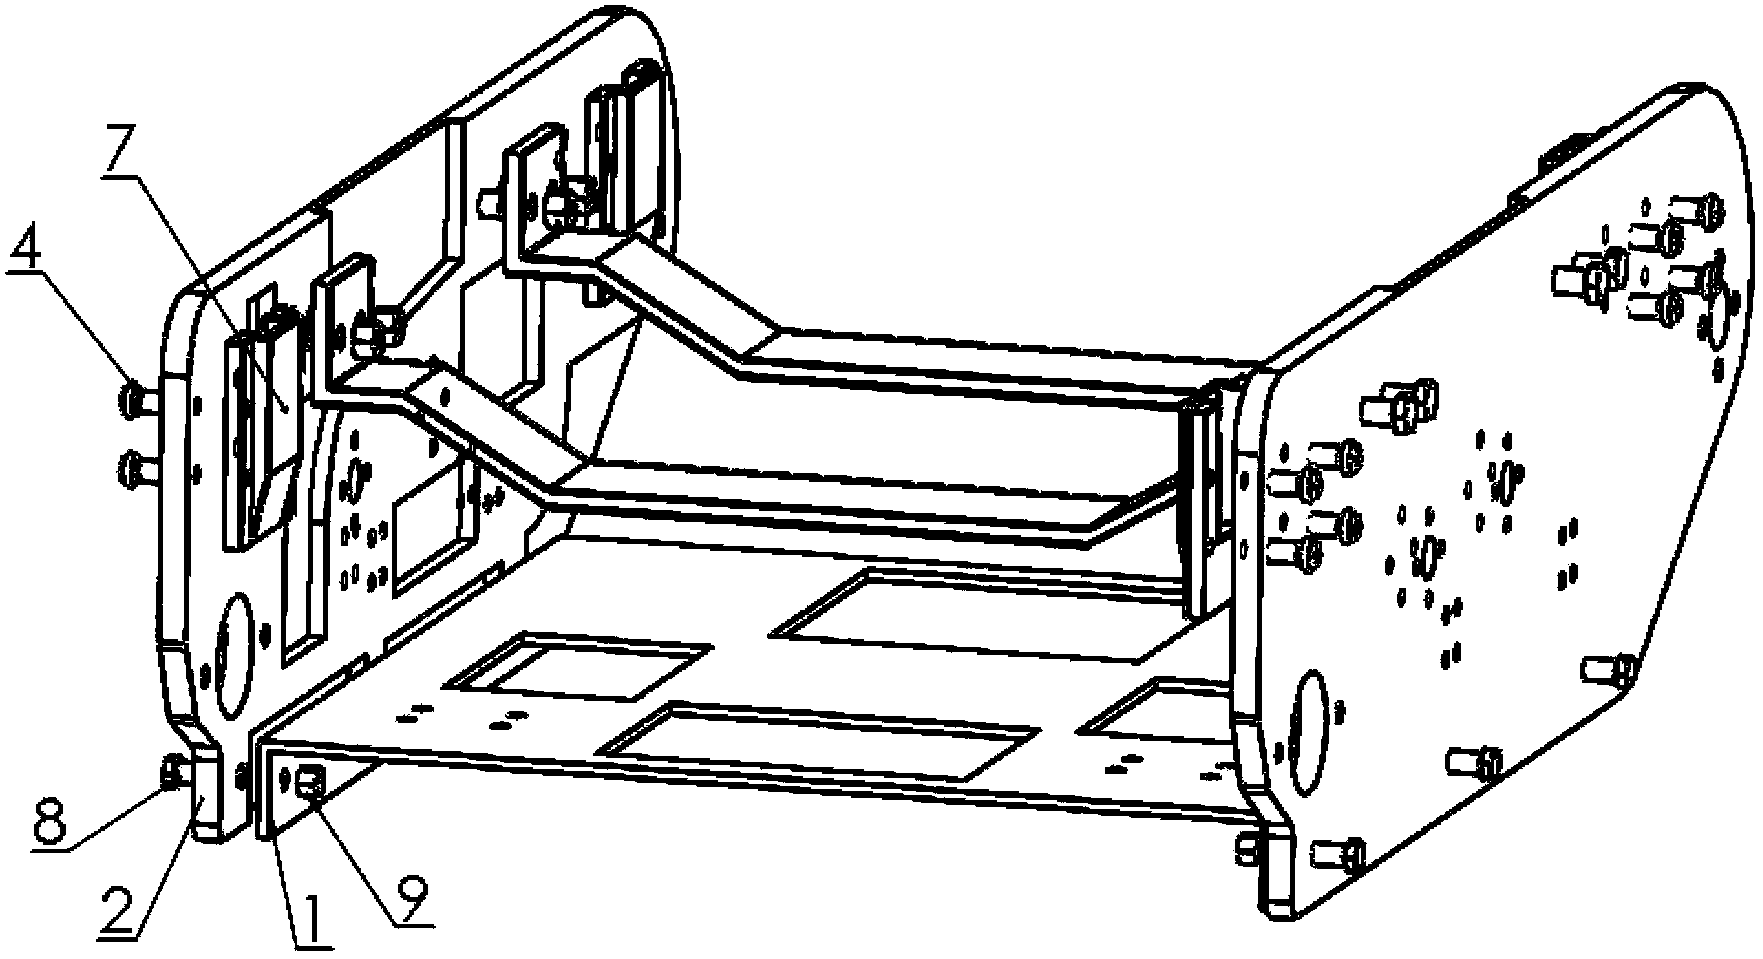 Plate type frame suitable for small-sized tracked robot